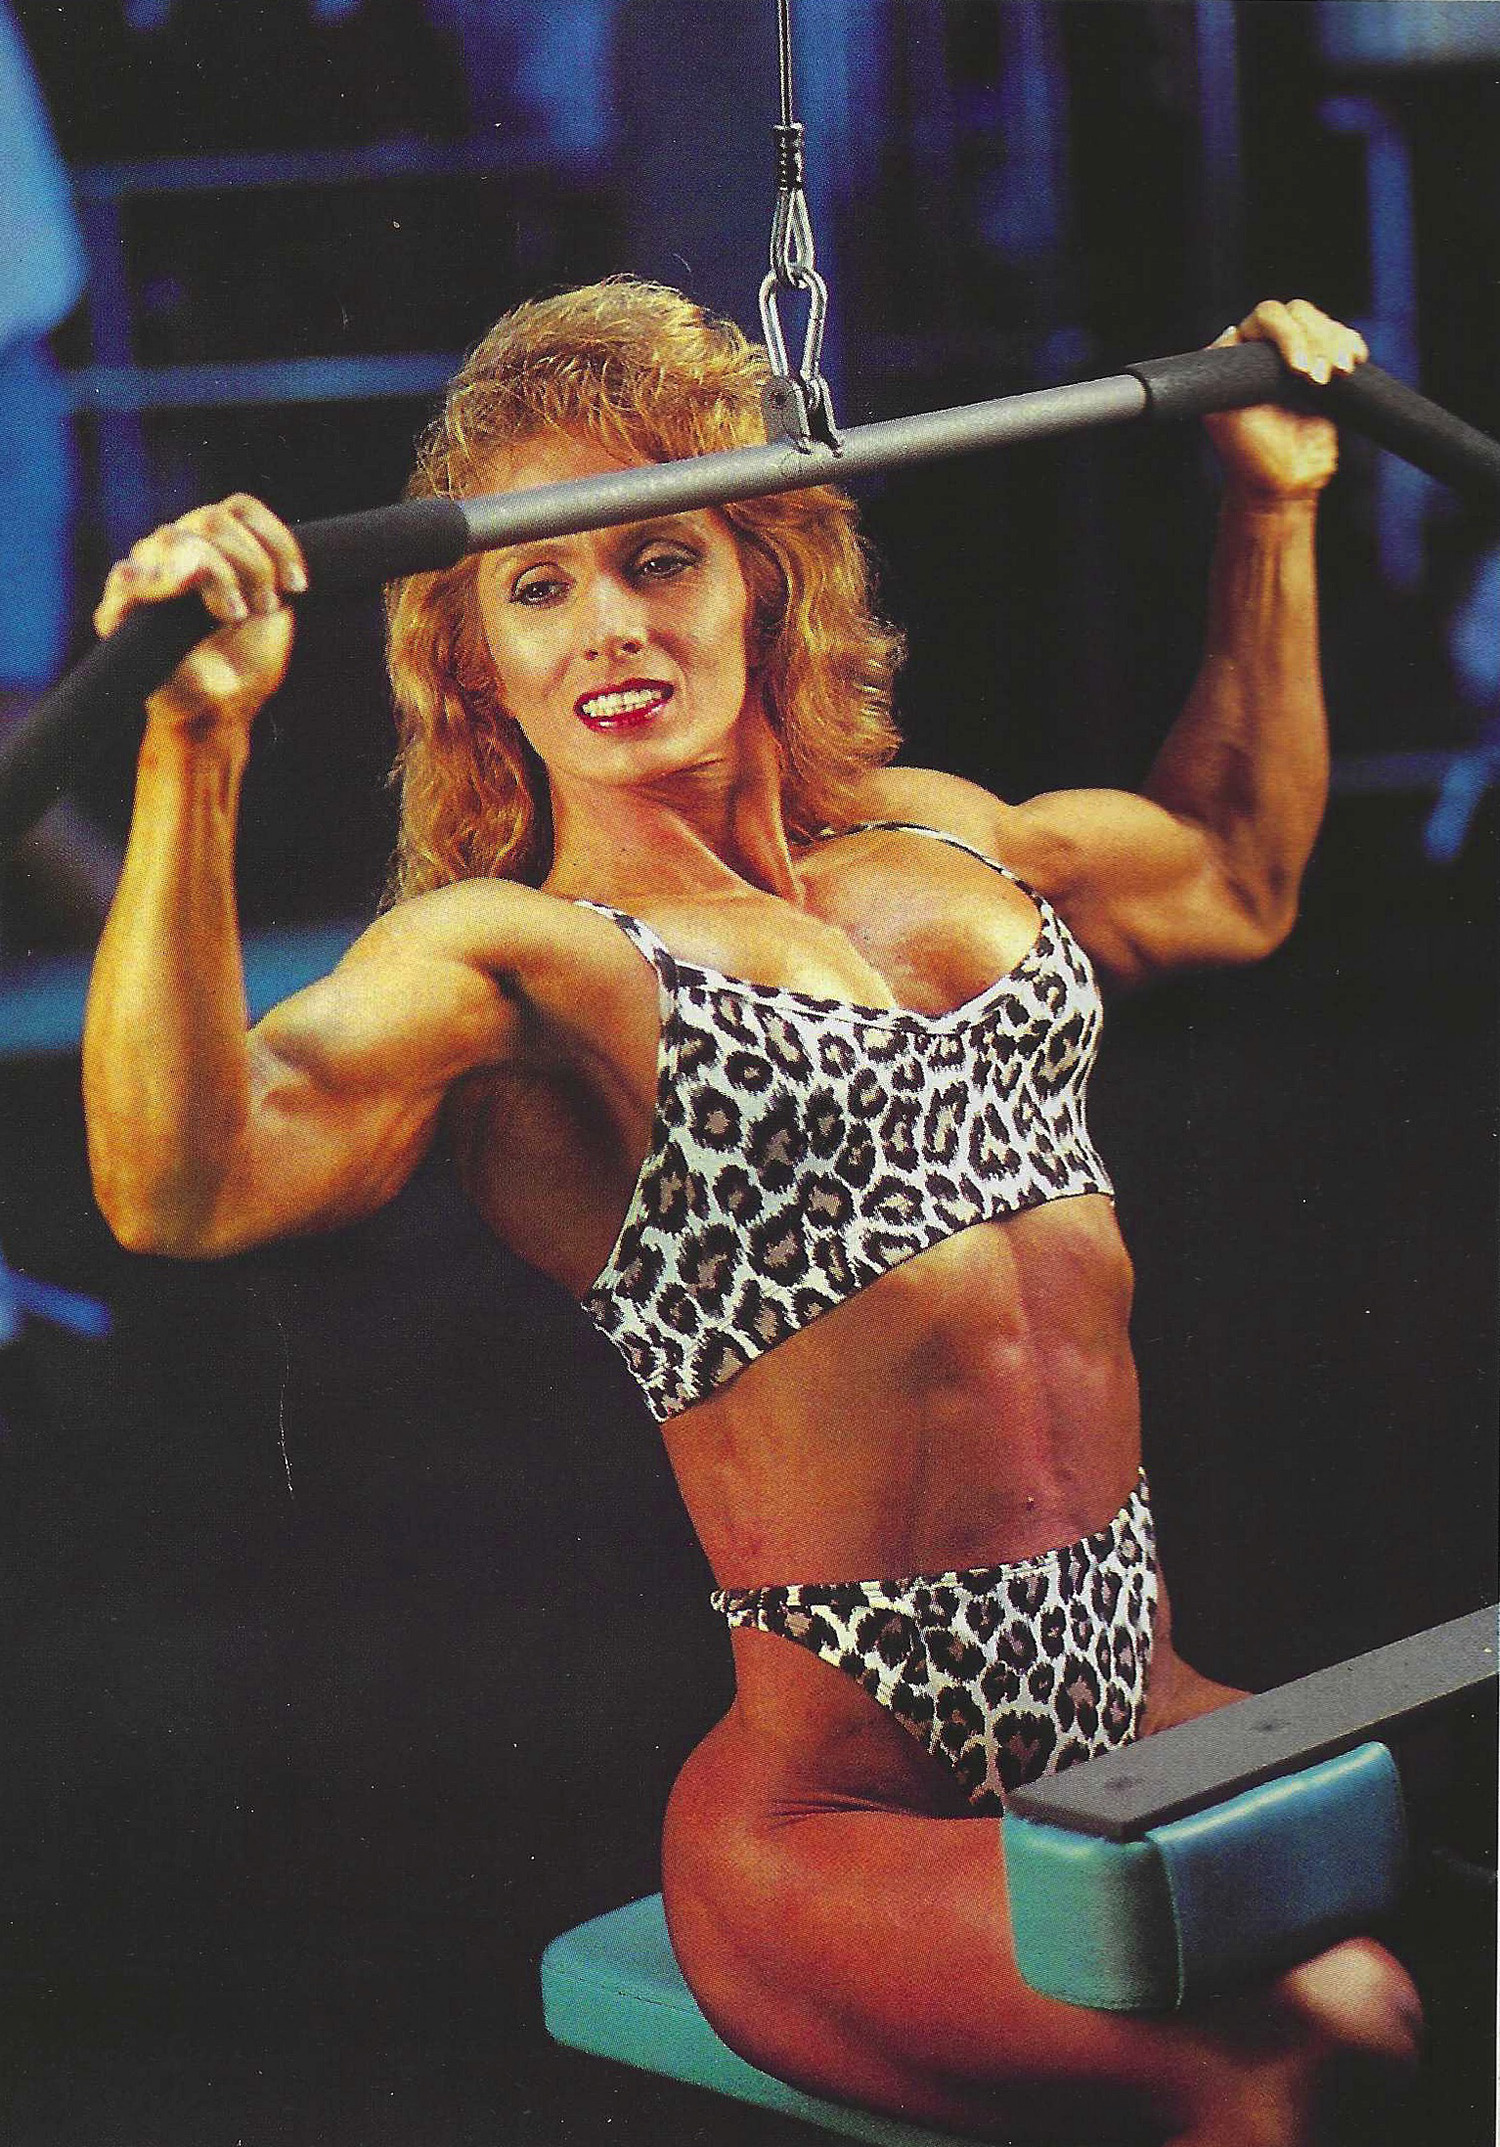 Deb McKnight IFBB Pro on the lat pulldown machine in a two piece leopard outfit.